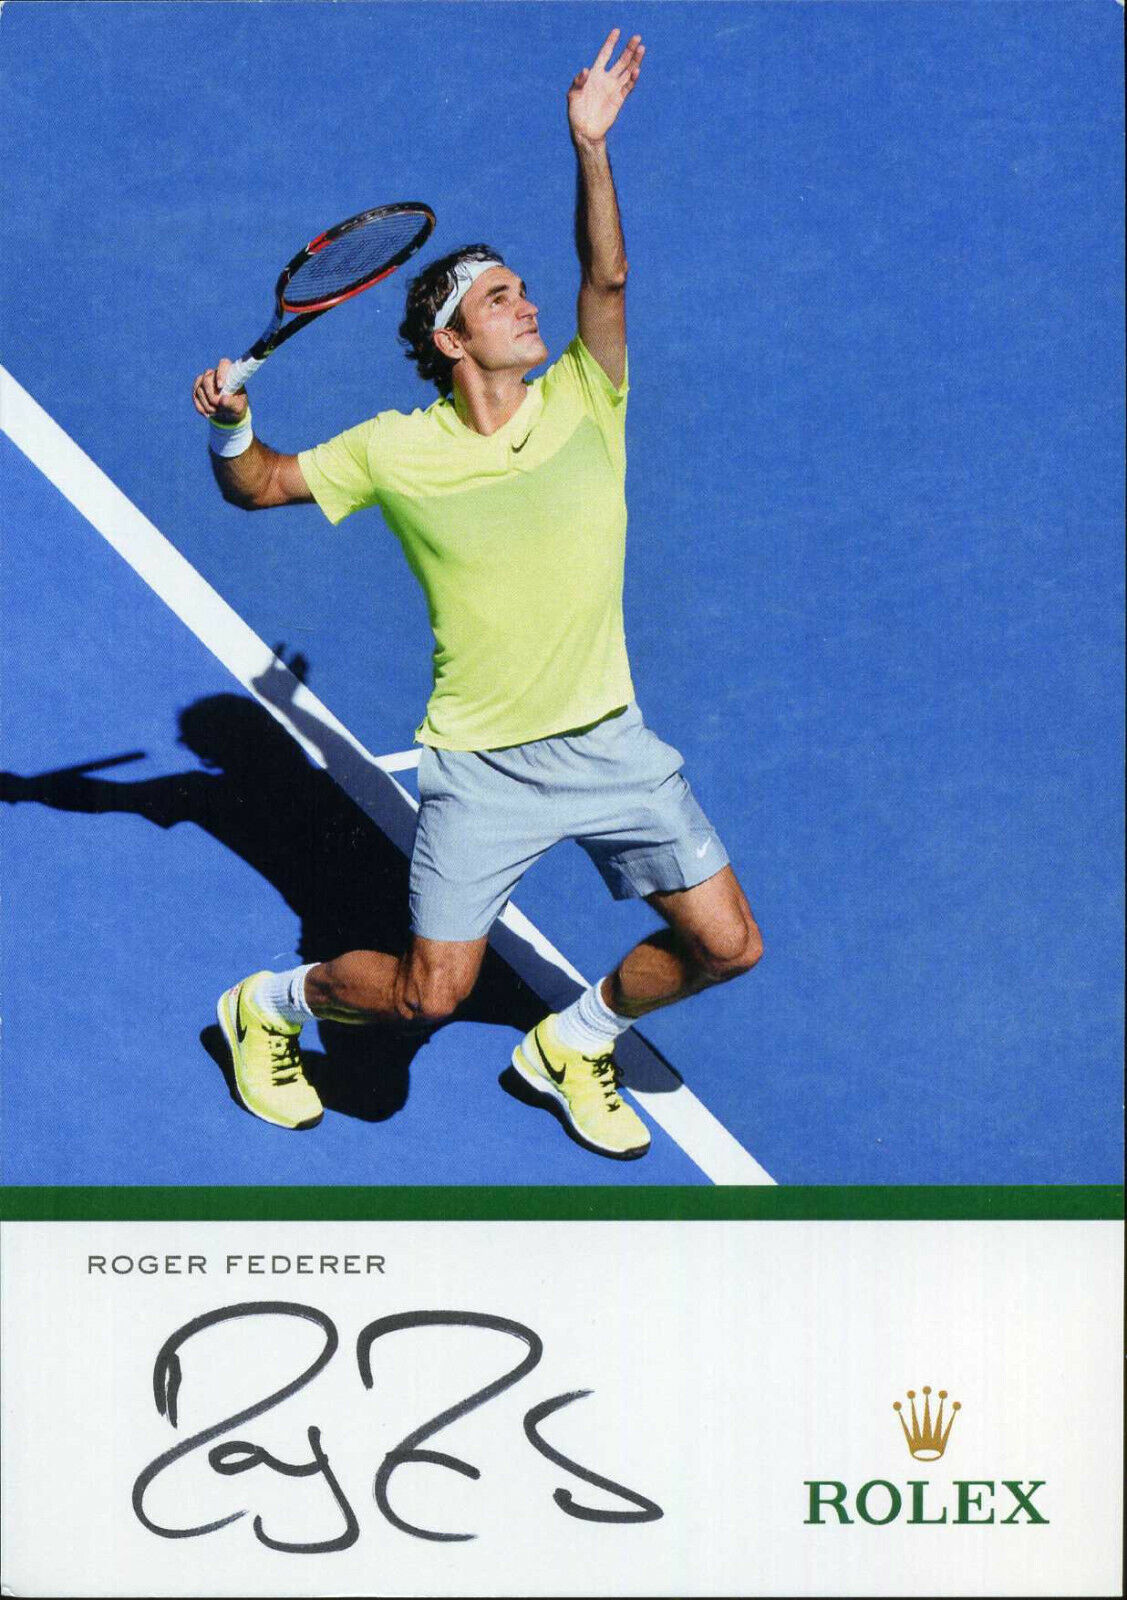 ROGER FEDERER Signed Photo Poster paintinggraph - Champion Tennis Player - reprint